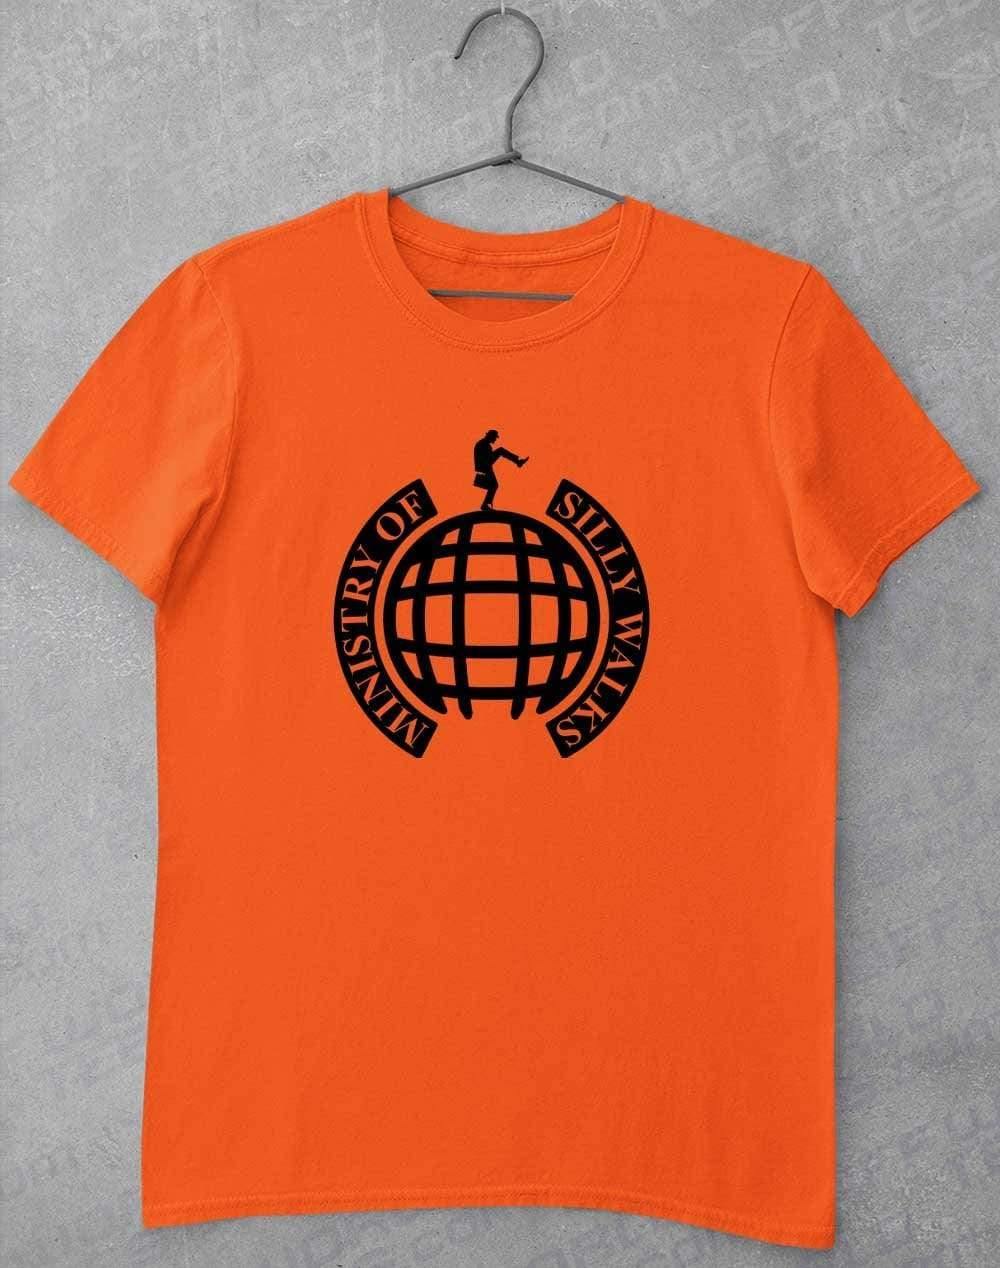 Ministry of Silly Walks T-Shirt S / Orange  - Off World Tees